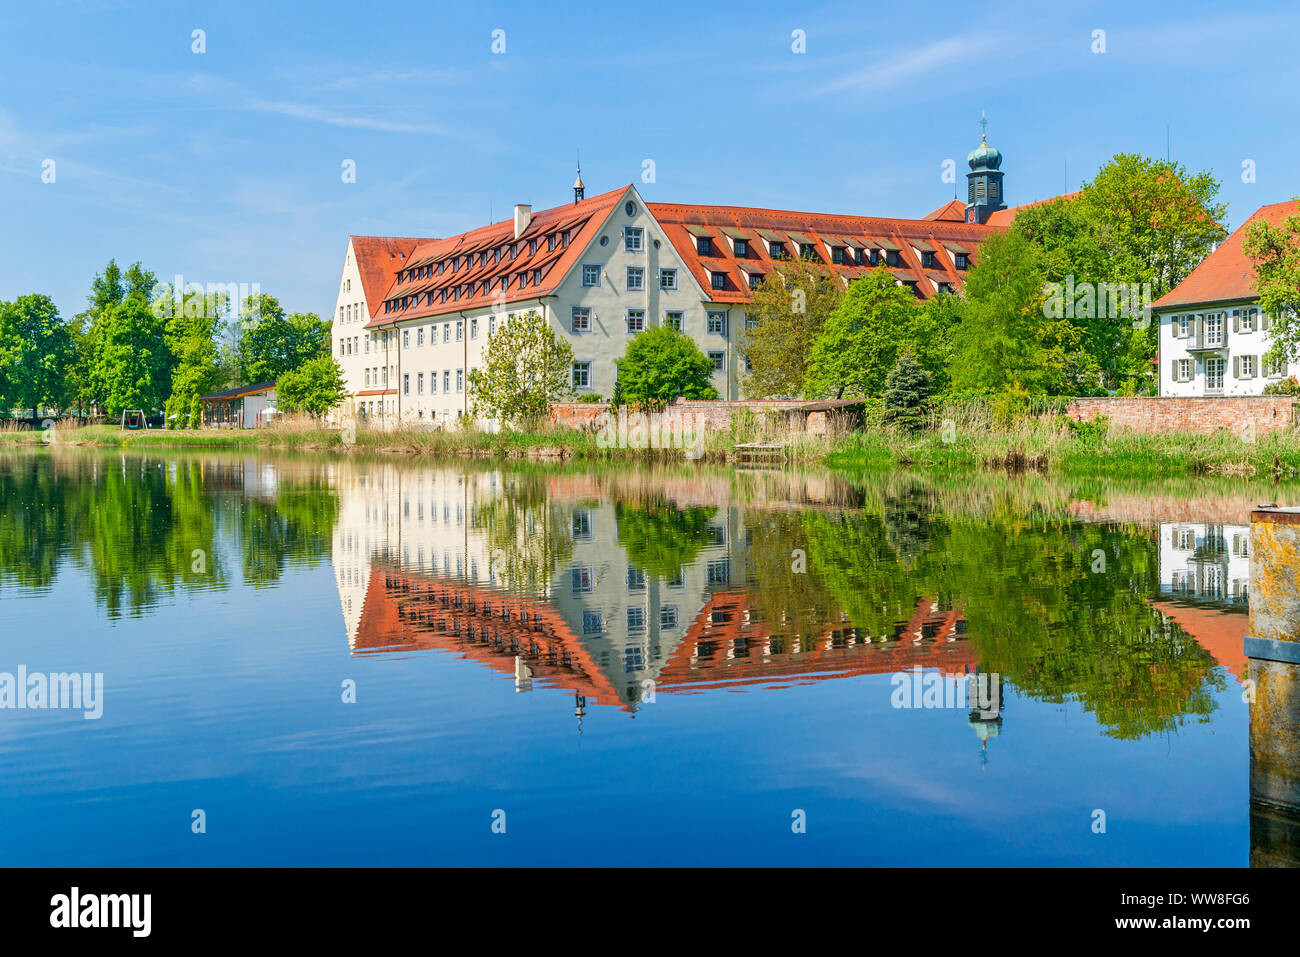 Germany, Baden-WÃ¼rttemberg, Wald, monastery Wald, former Cistercian monastery, south view, monastery pond. Today it is a Benedictine monastery, with connected Wald Monastery home school Stock Photo